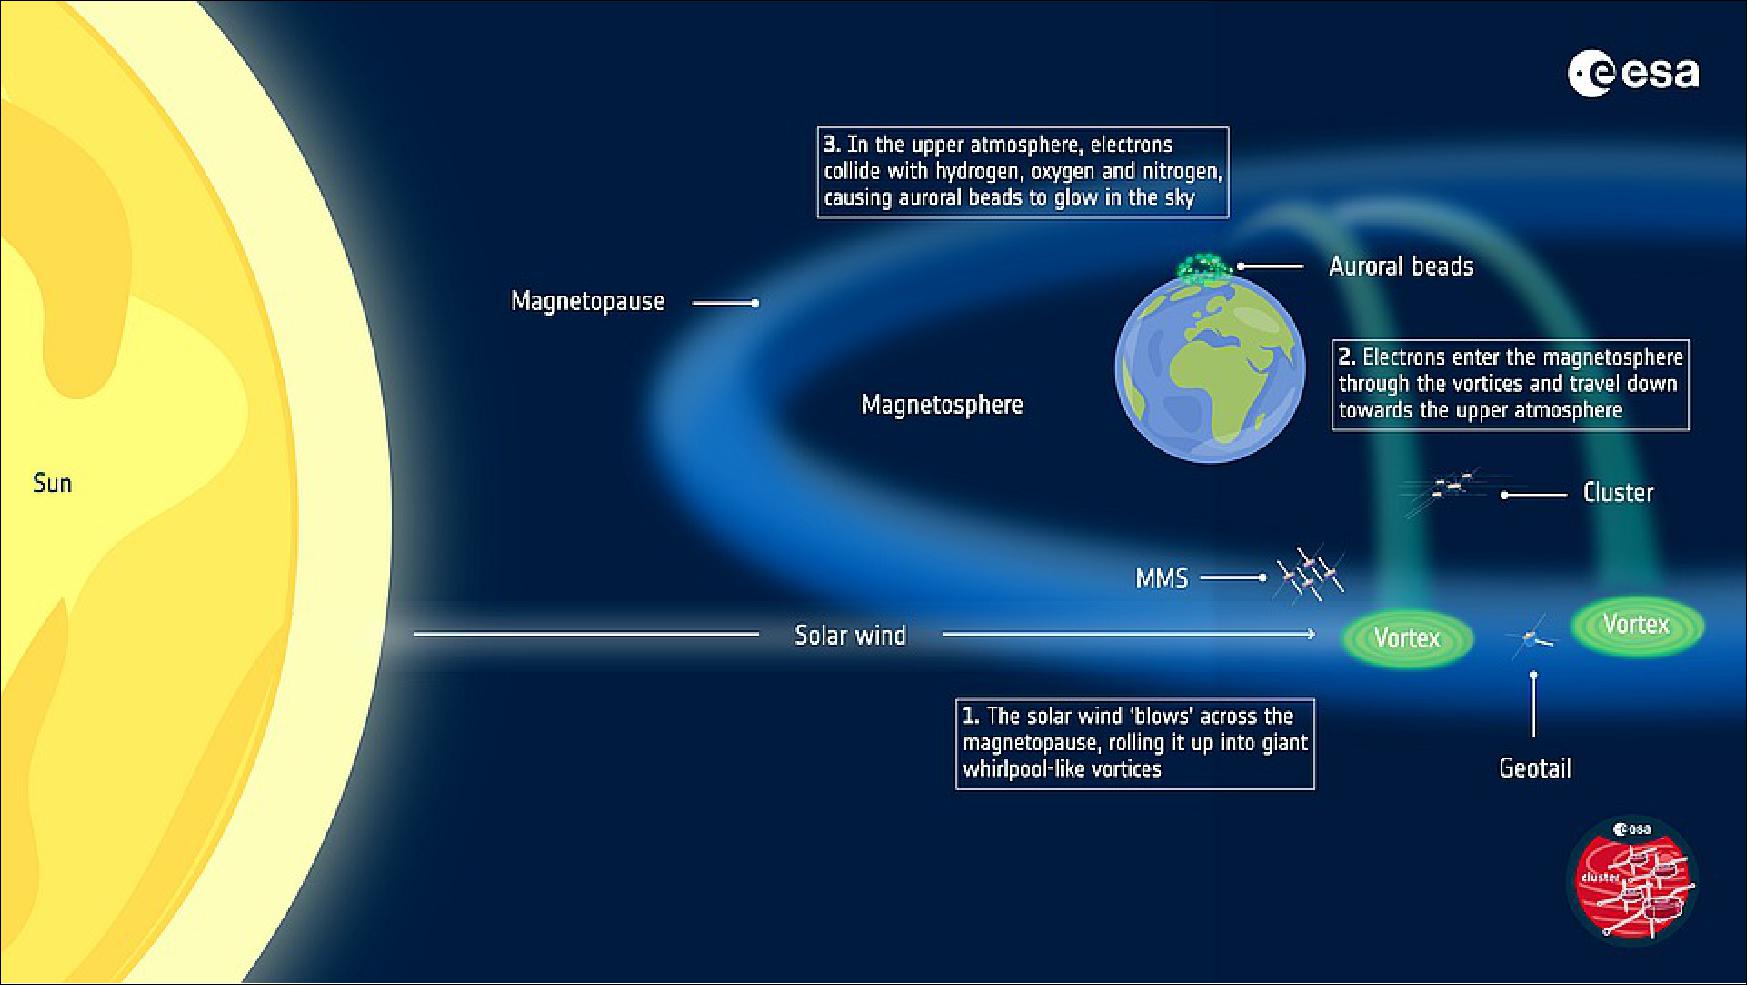 Figure 11: When the solar wind blows past the magnetopause, vortices can form, which sends a stream of electrons towards Earth's surface. (image credit: ESA)